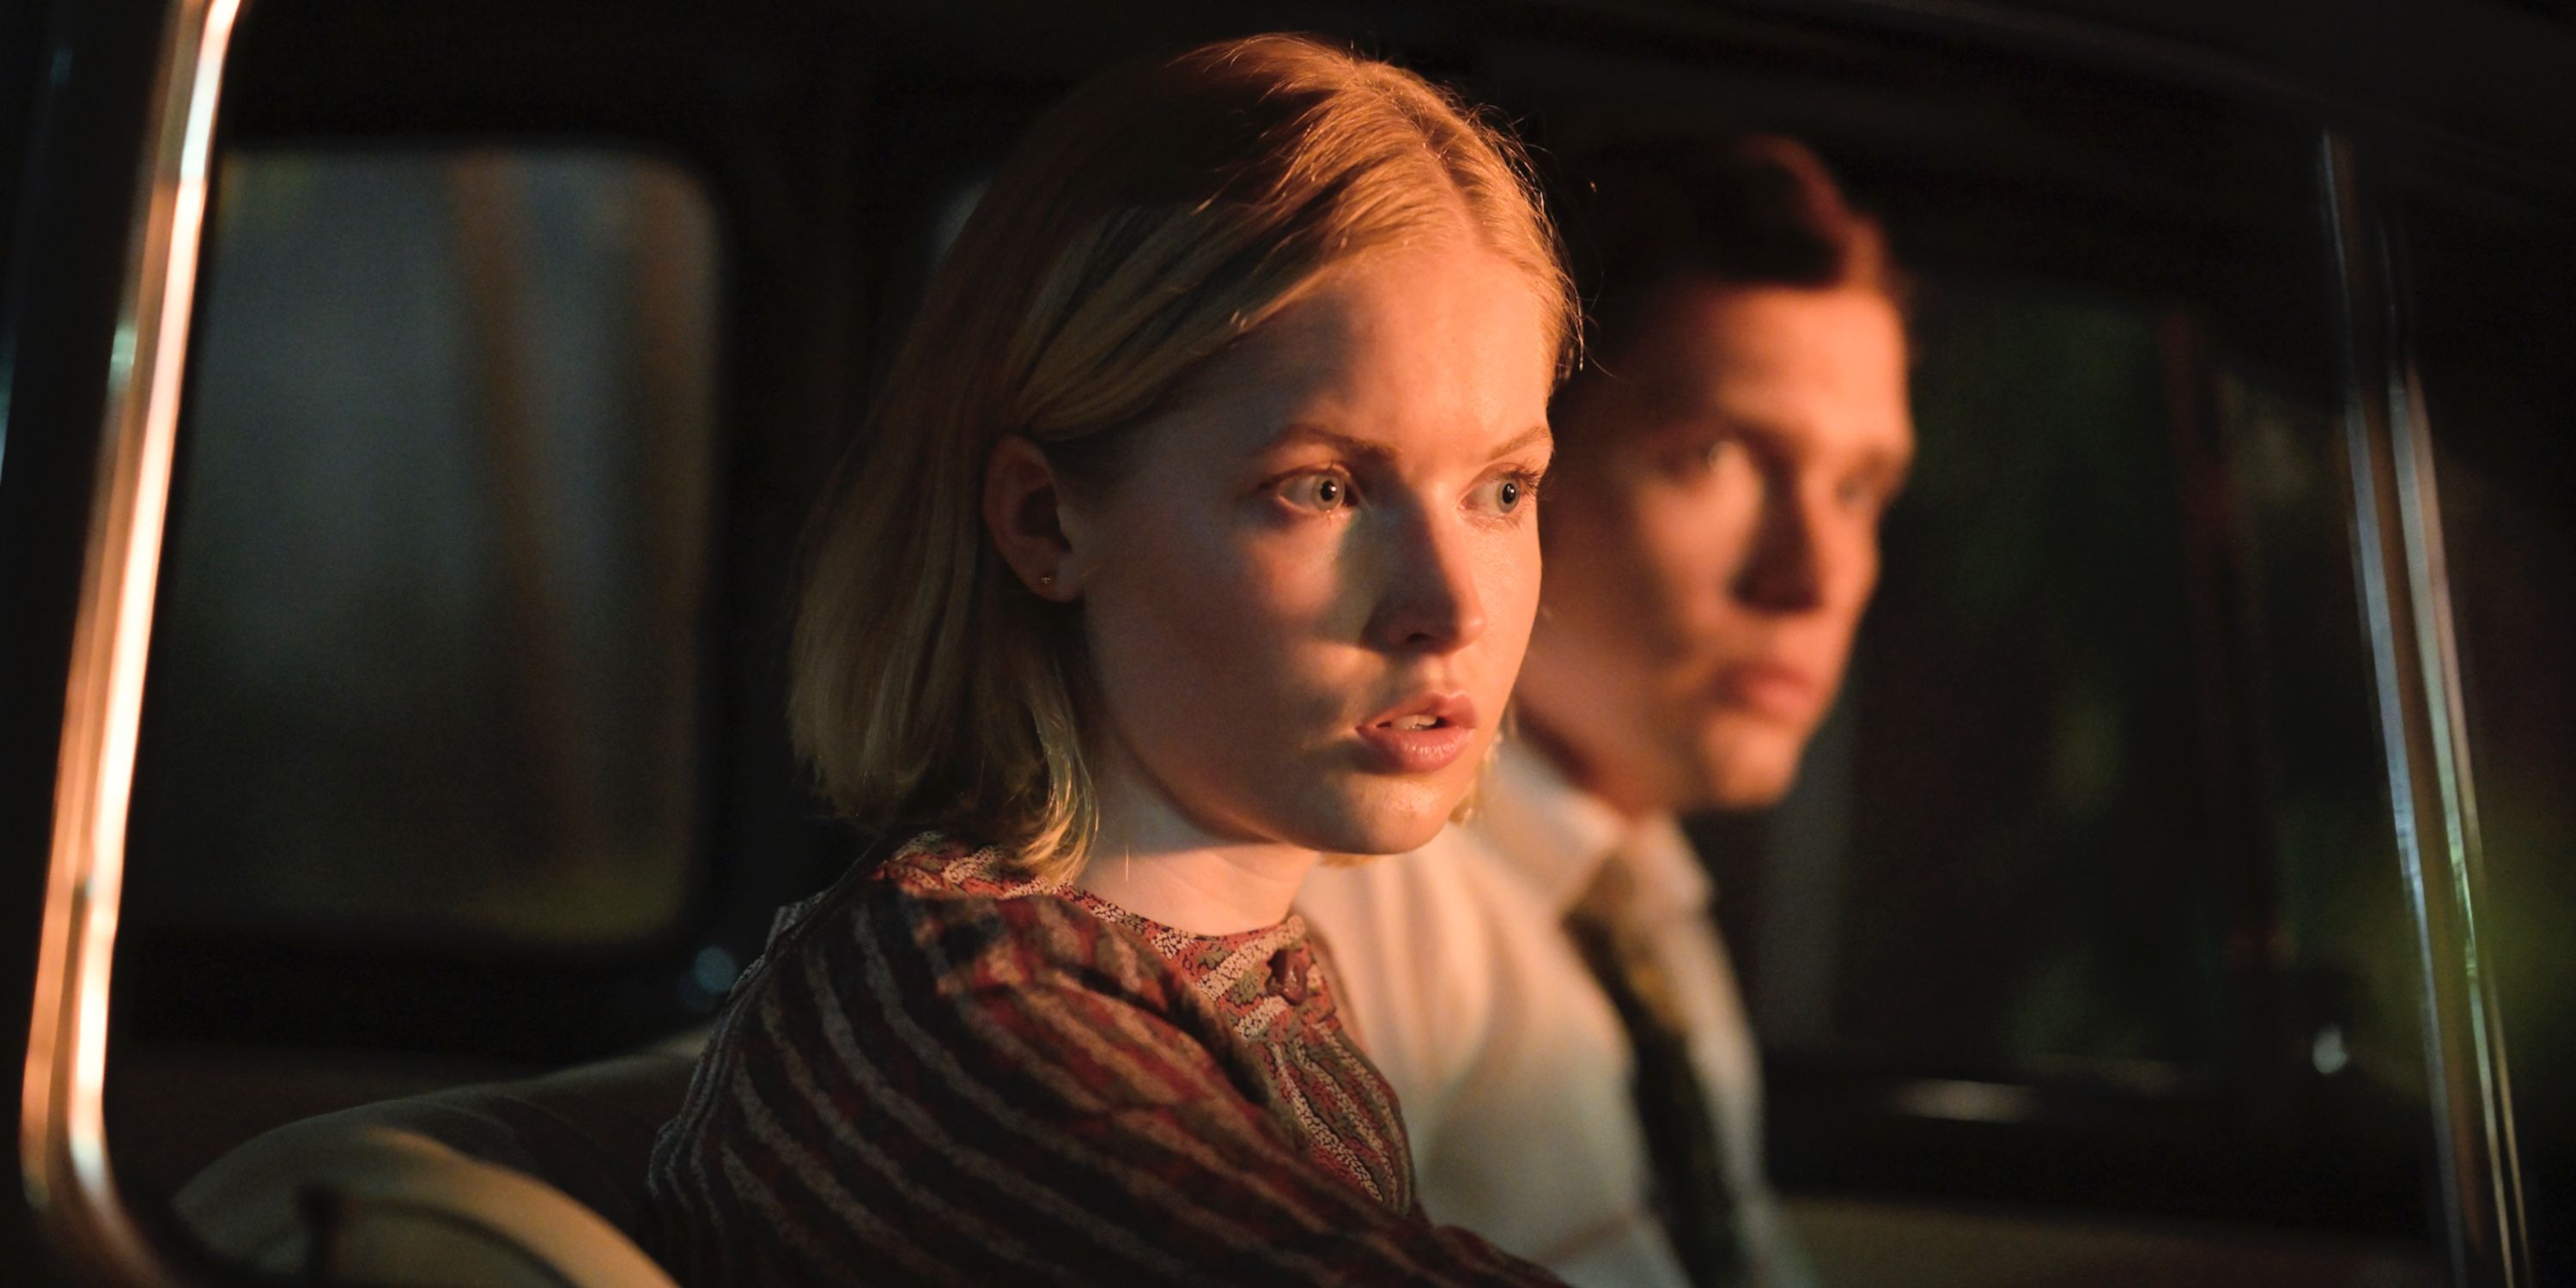 Ellie Bamber as Angela Knippenberg and Billy Howle as Herman Knippenberg in The Serpent on Netflix